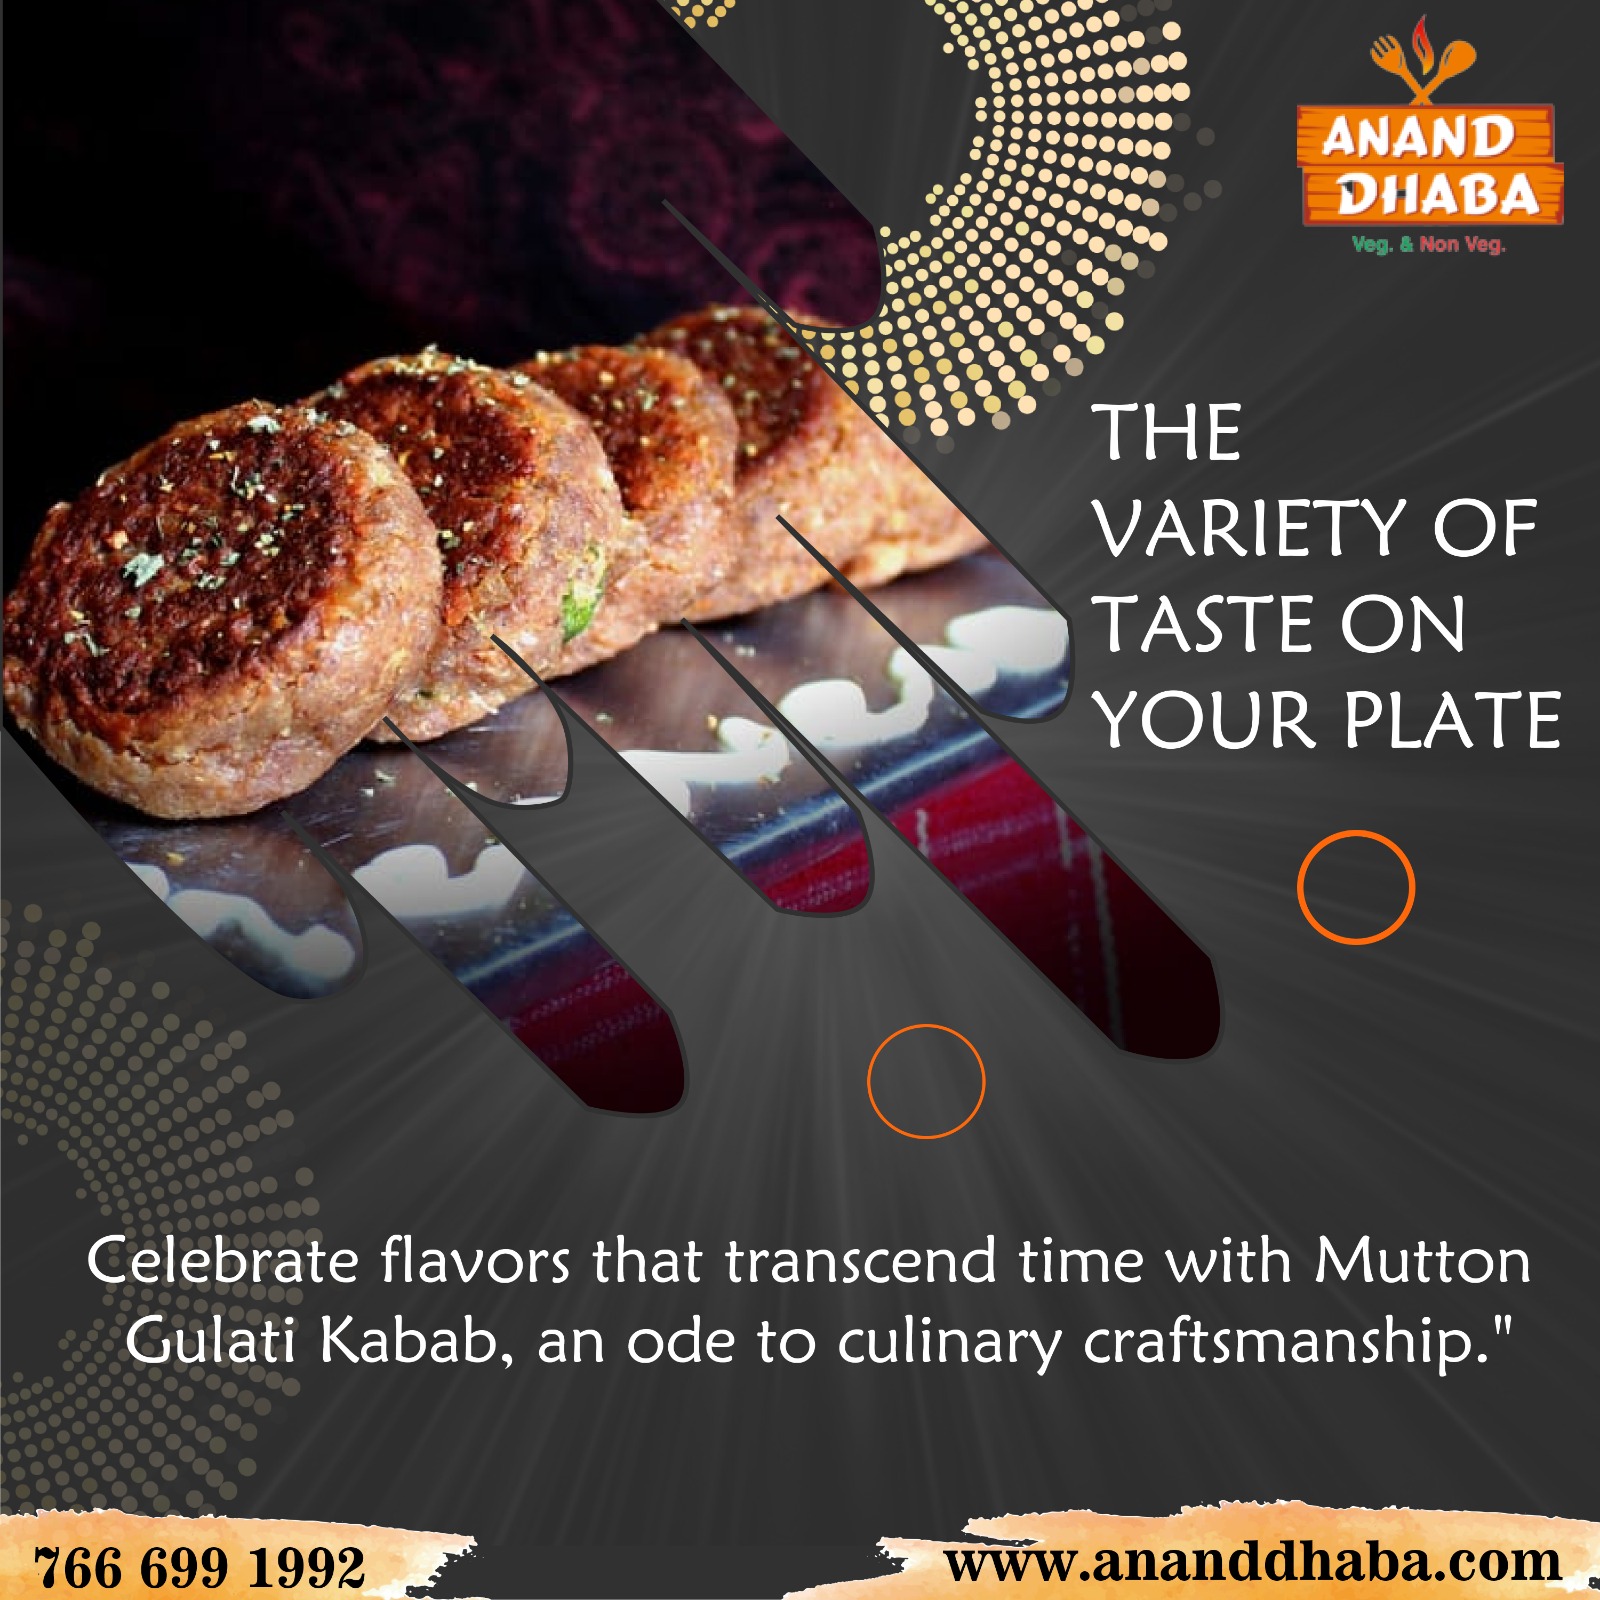 Indulge in the timeless flavors at Anand Dhaba